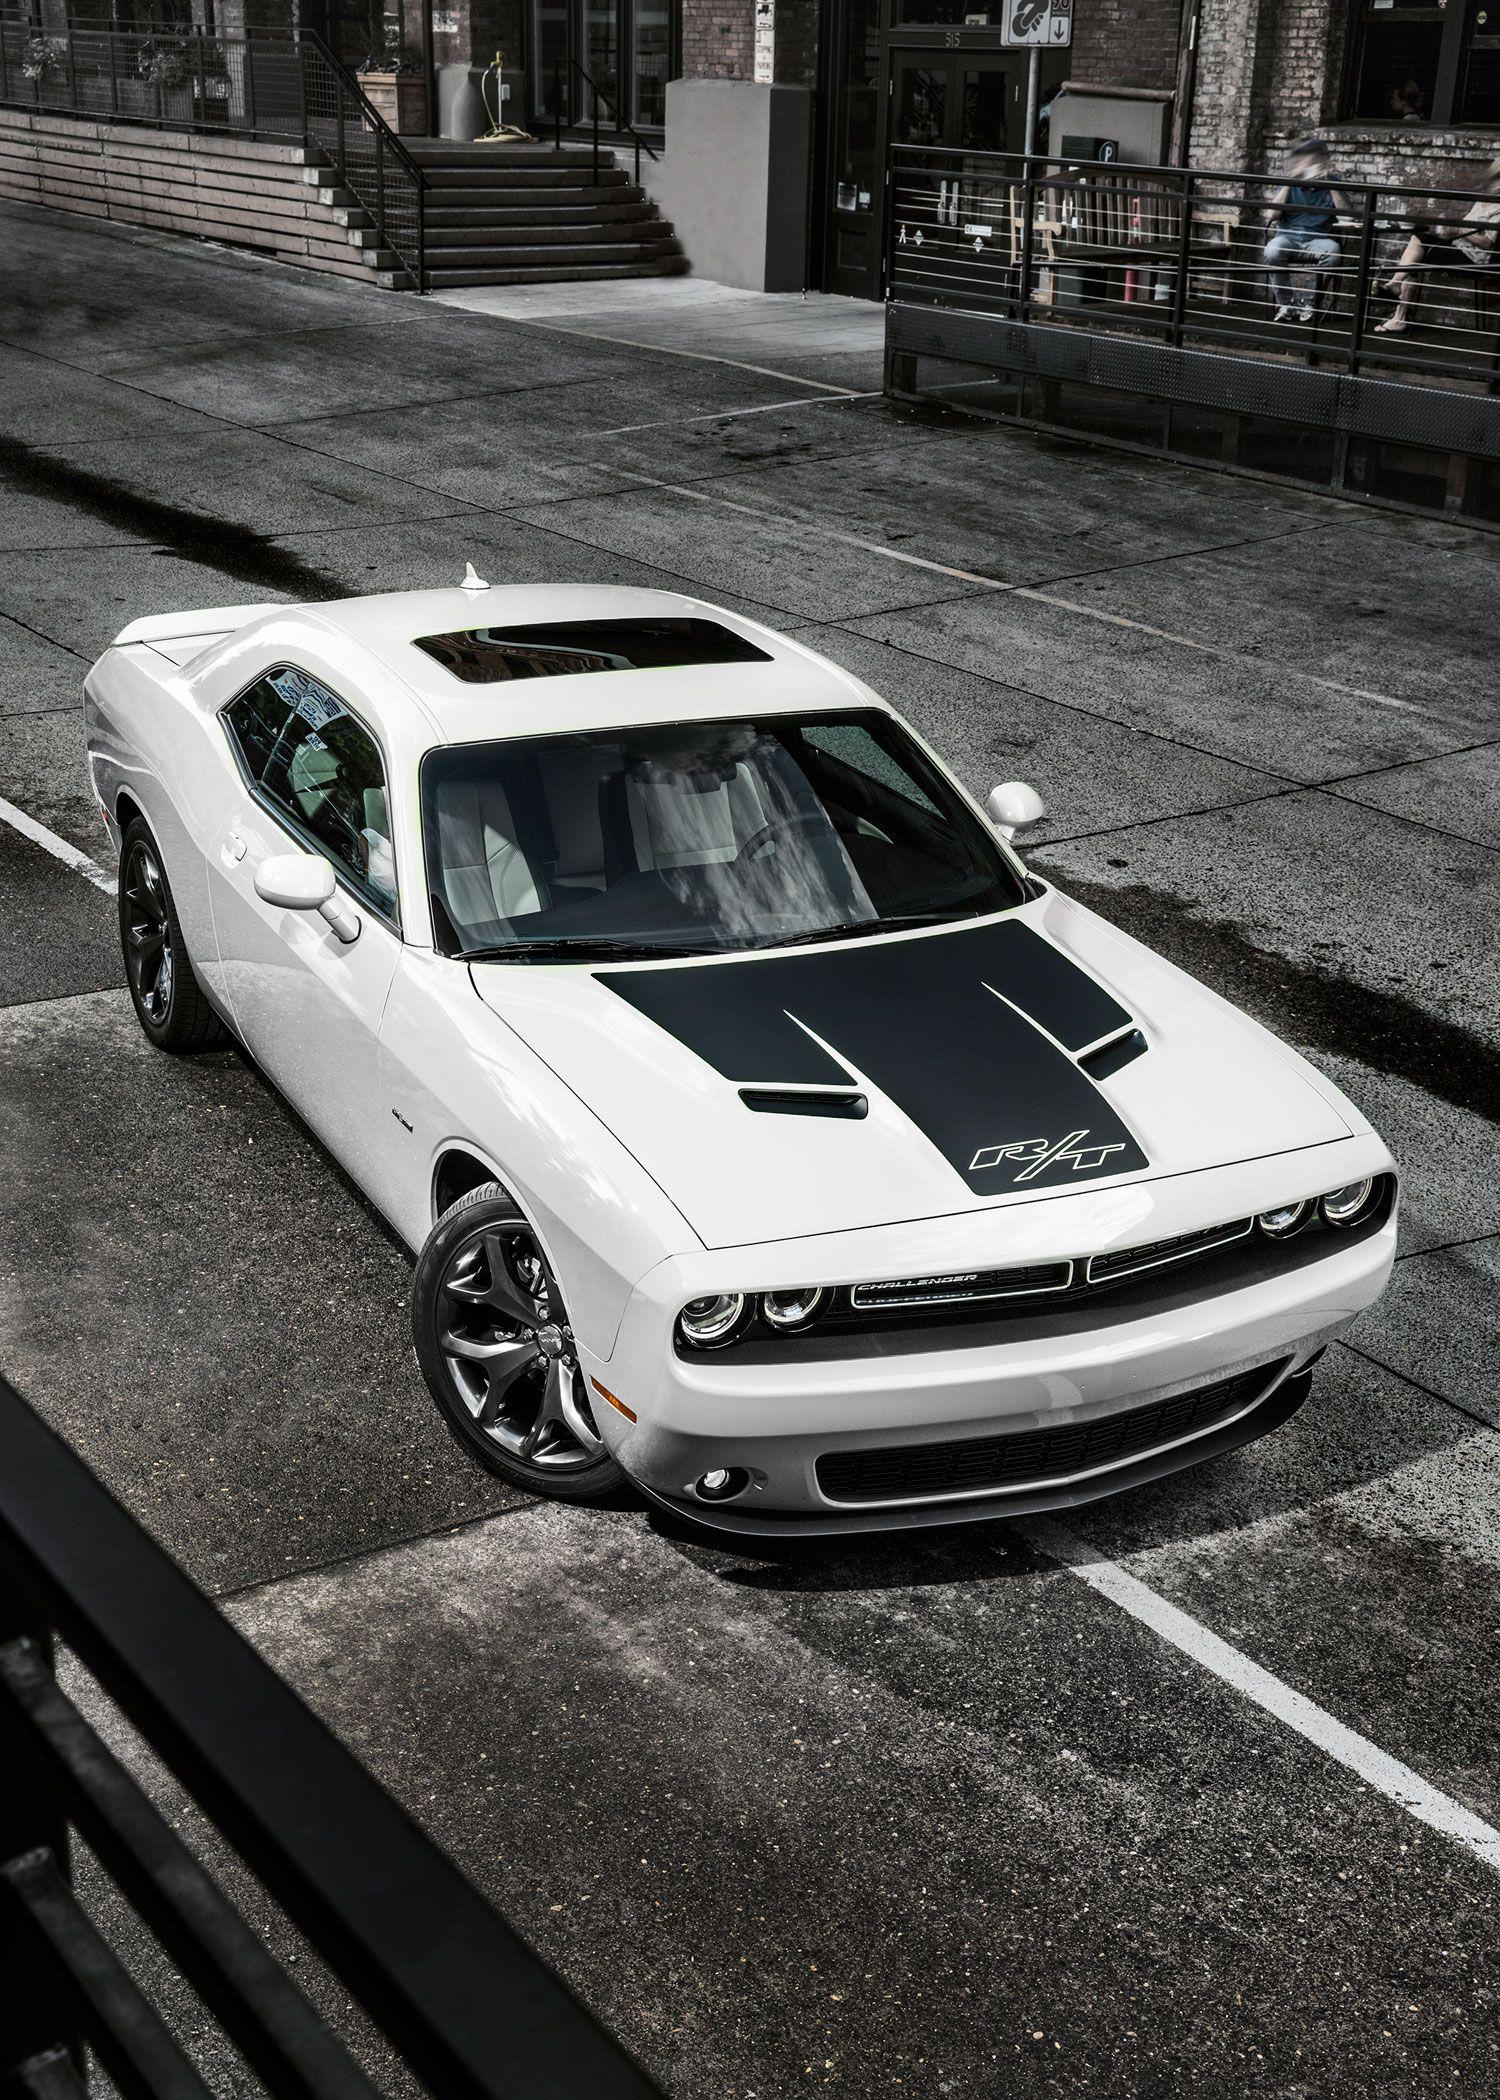 Black and White Dodge Hellcat Logo - Just Listed: 2016 Dodge Challenger Hellcat Convertible | Automobile ...